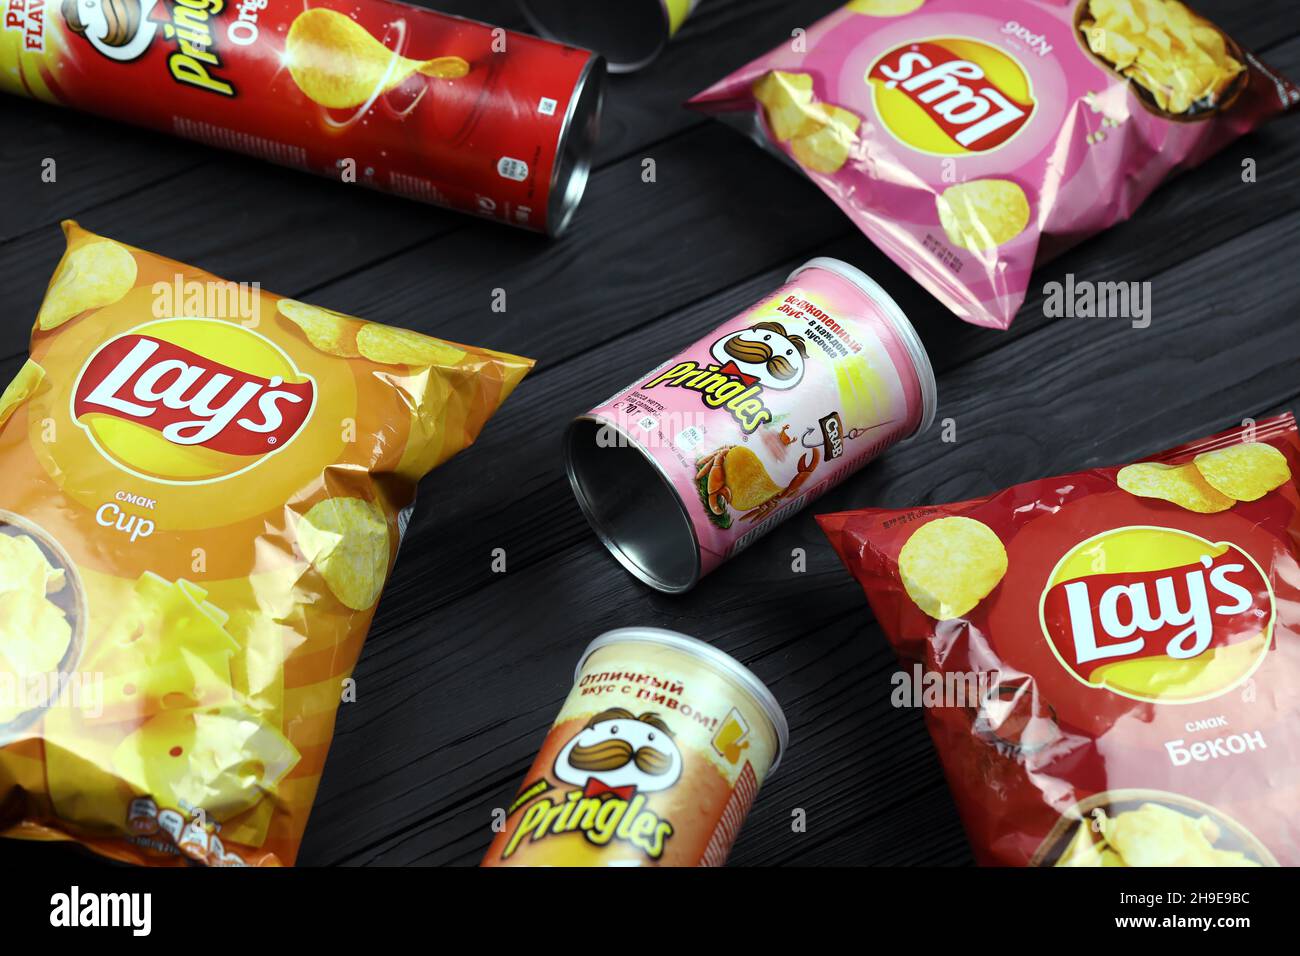 KHARKOV, UKRAINE - JANUARY 3, 2021: Various flavoured of lay's and pringles potato chips in classic packages design. Worldwide famous brands of potato Stock Photo